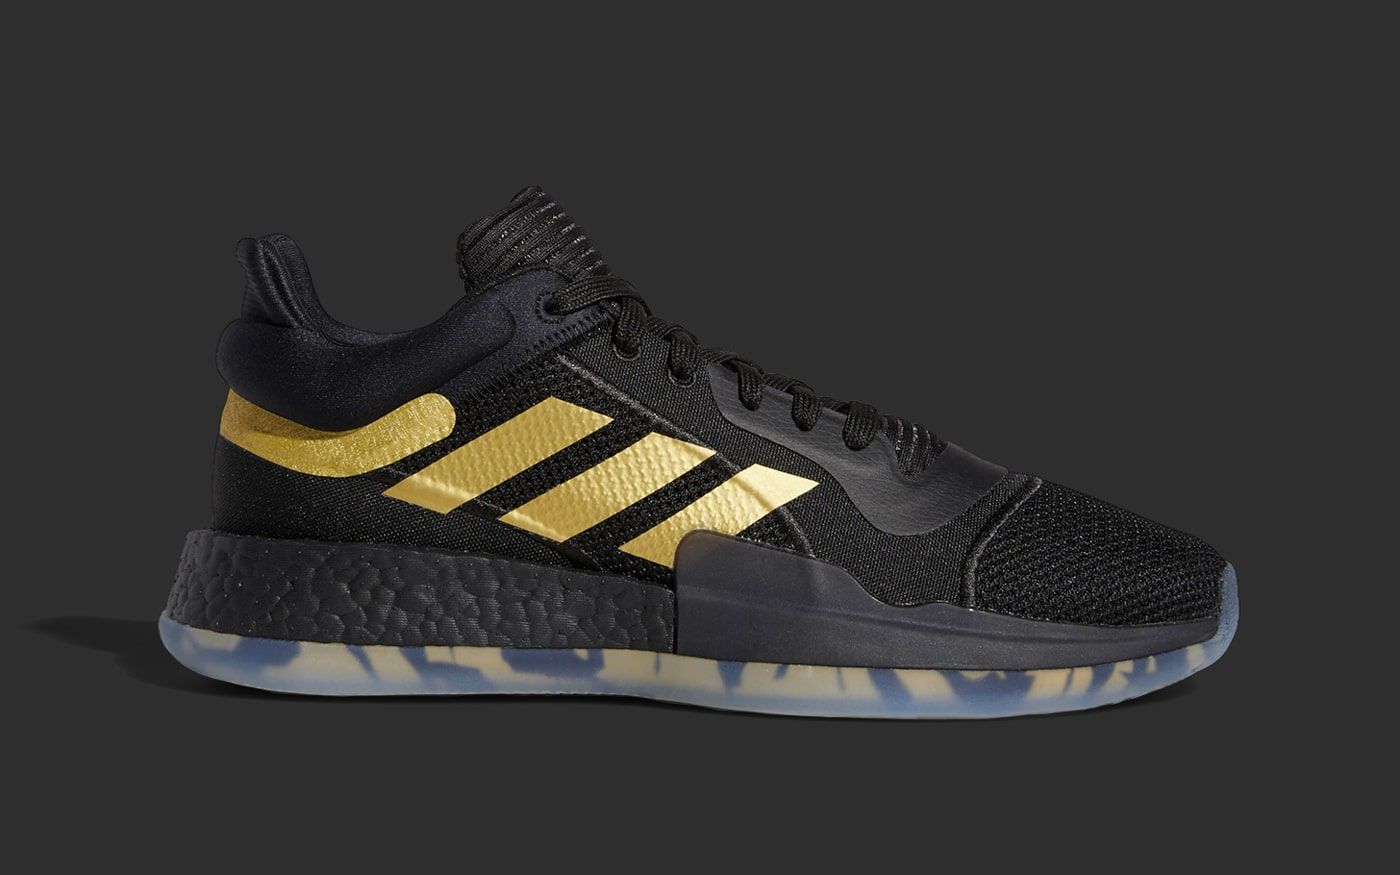 adidas Marquee Boost Top Ten 40th Anniversary